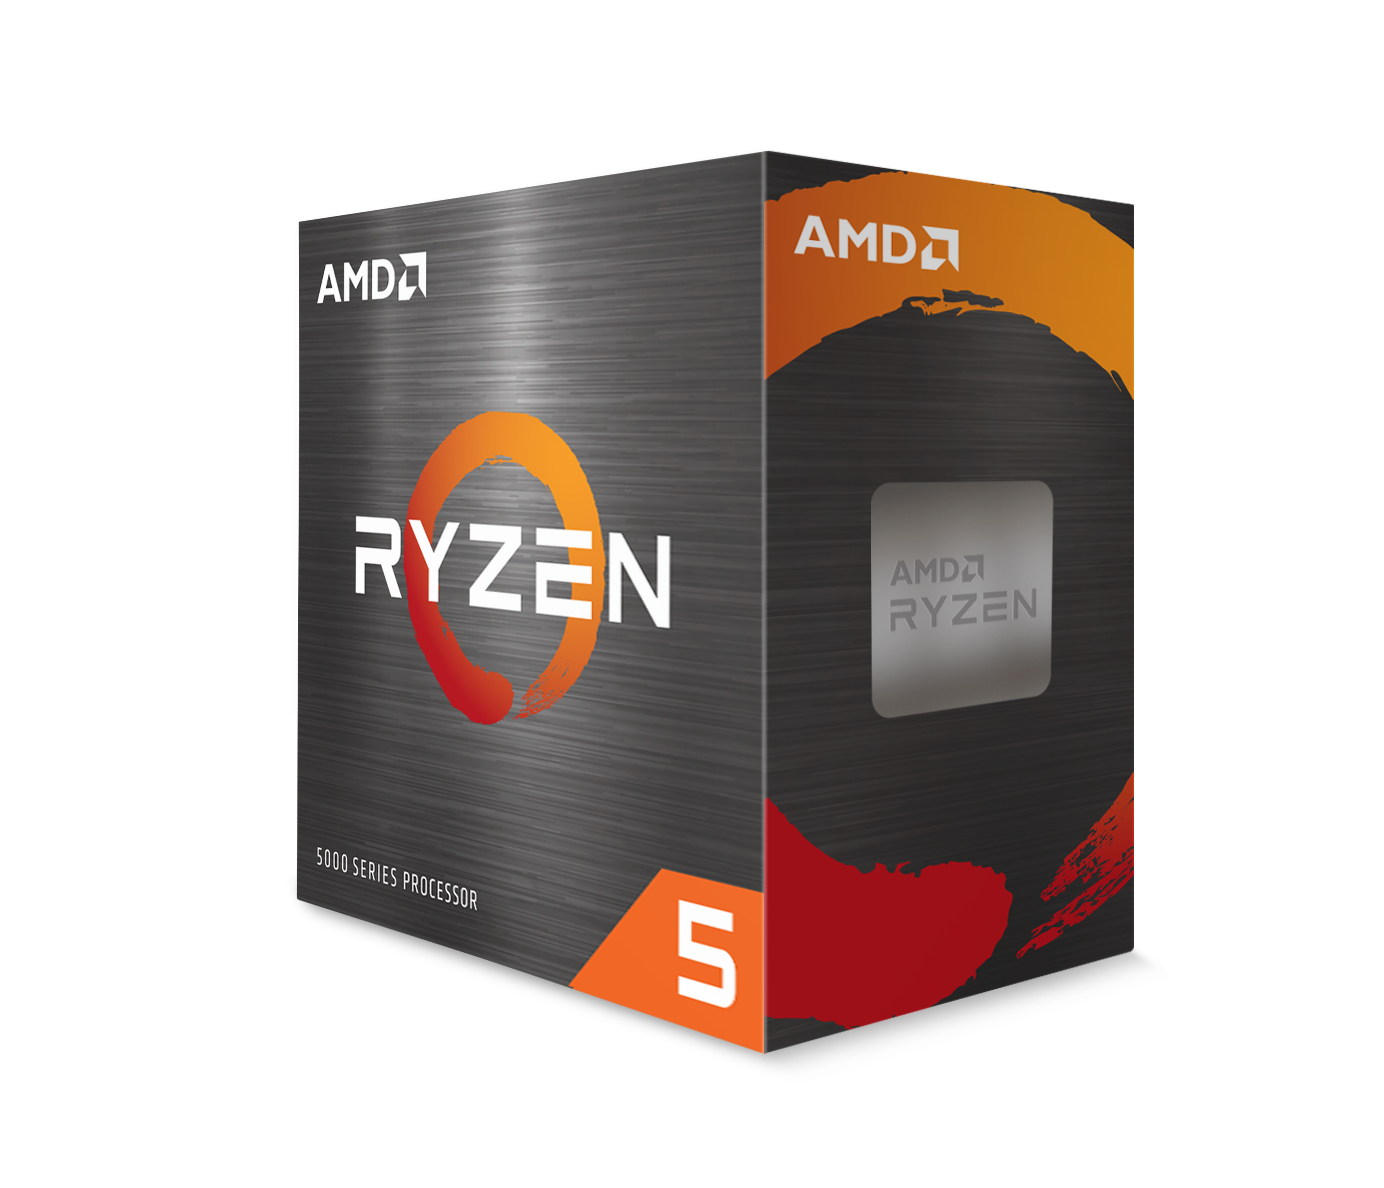 AMD Ryzen 5 5500 Processor 6-core 12 Threads up to 4.2 GHz Wraith Stealth Cooler